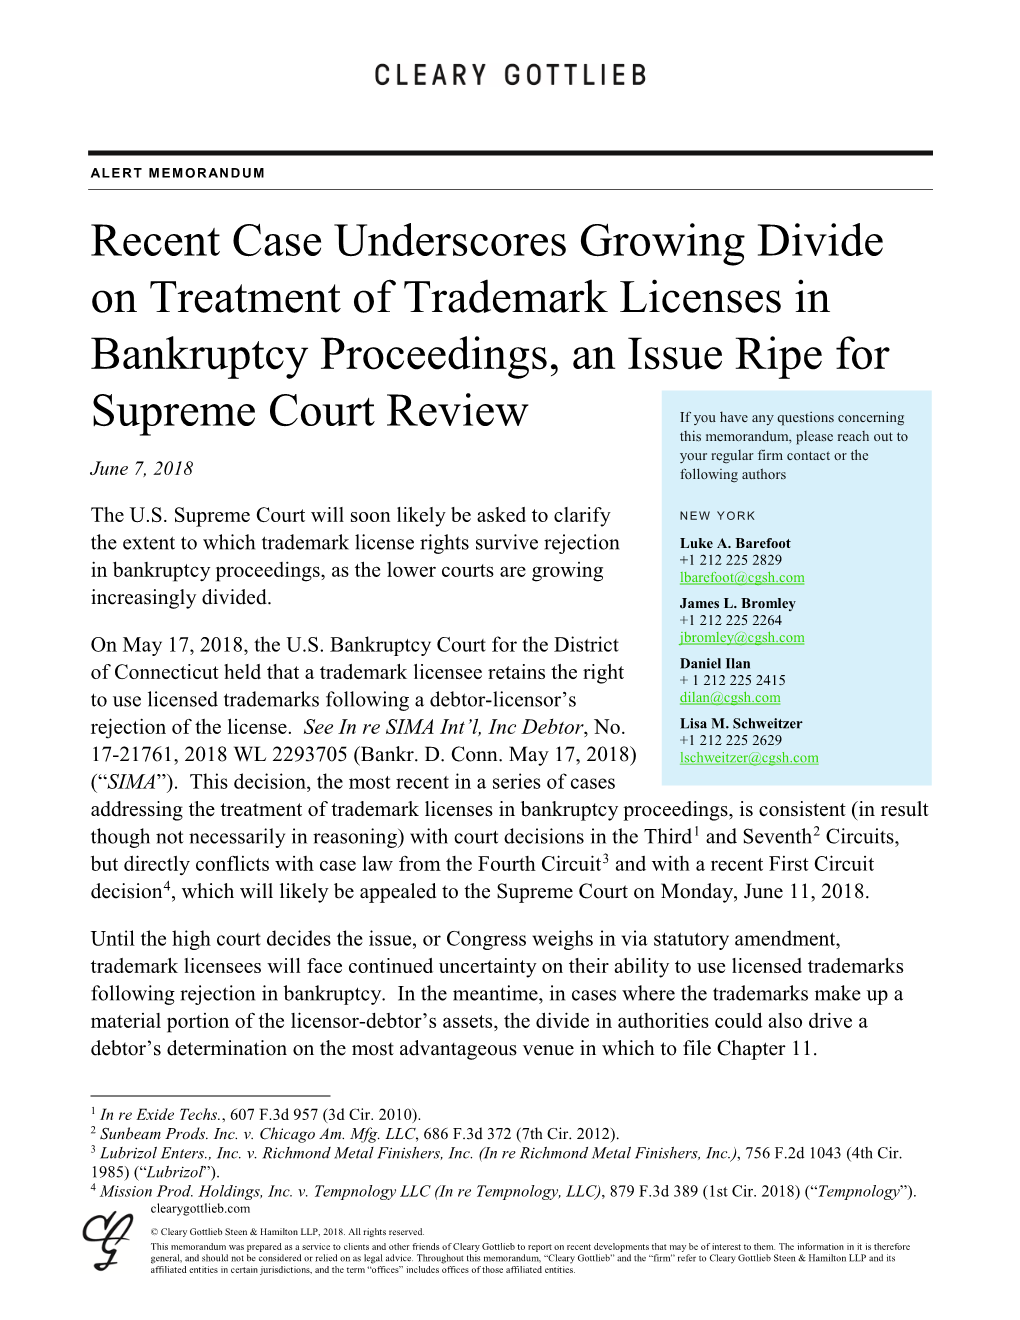 Recent Case Underscores Growing Divide on Treatment of Trademark Licenses in Bankruptcy Proceedings, an Issue Ripe for Supreme C